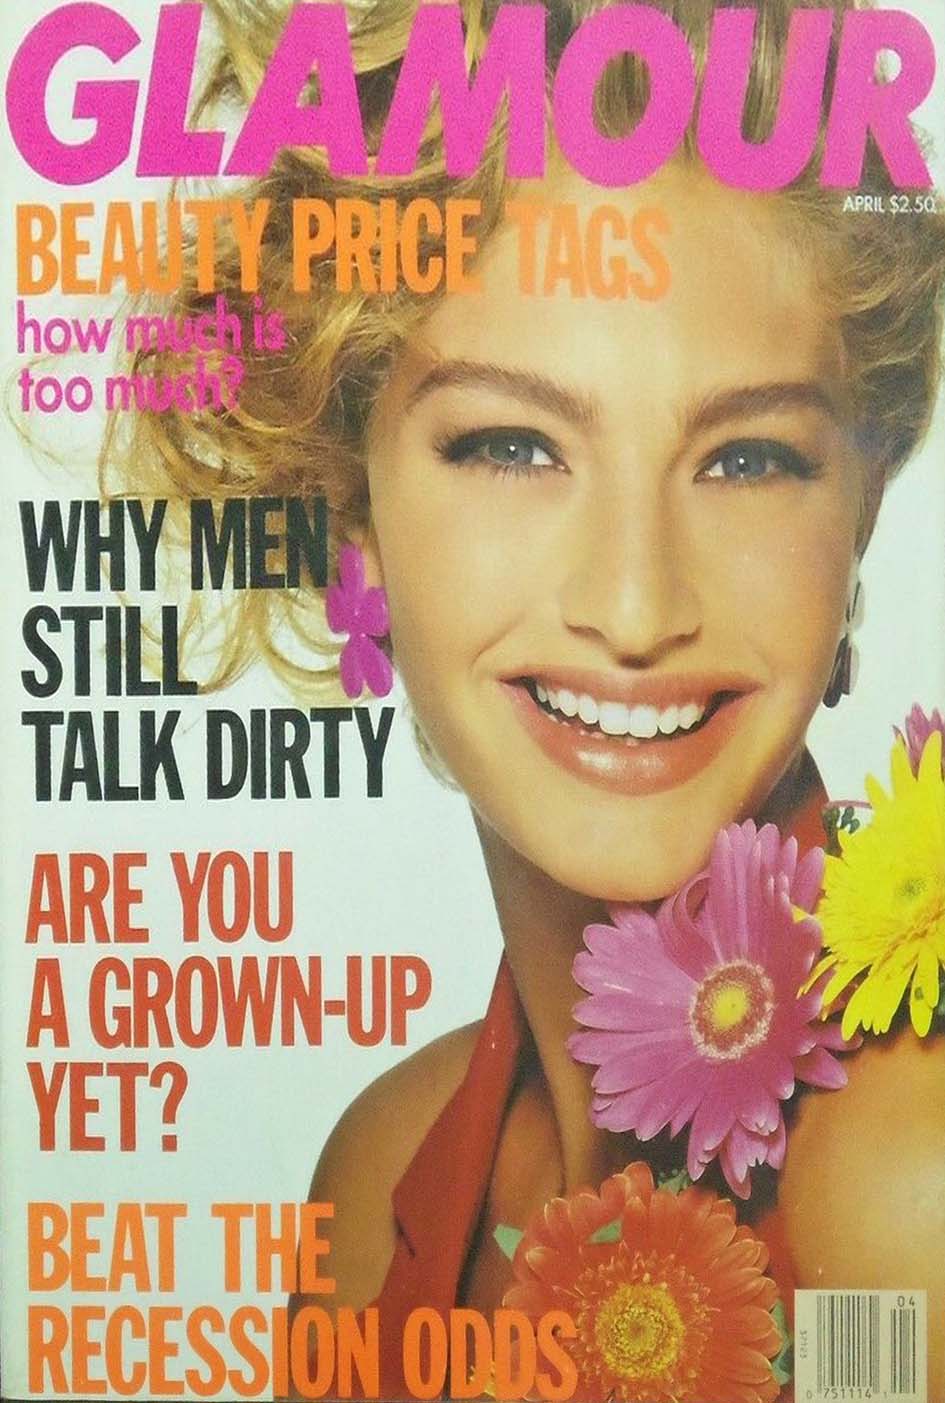 Glamour April 1991 magazine back issue Glamour magizine back copy Glamour April 1991 Womens Magazine Back Issue Published by Conde Nast Publications. Beauty Price Tags How Much Is Too Much?.